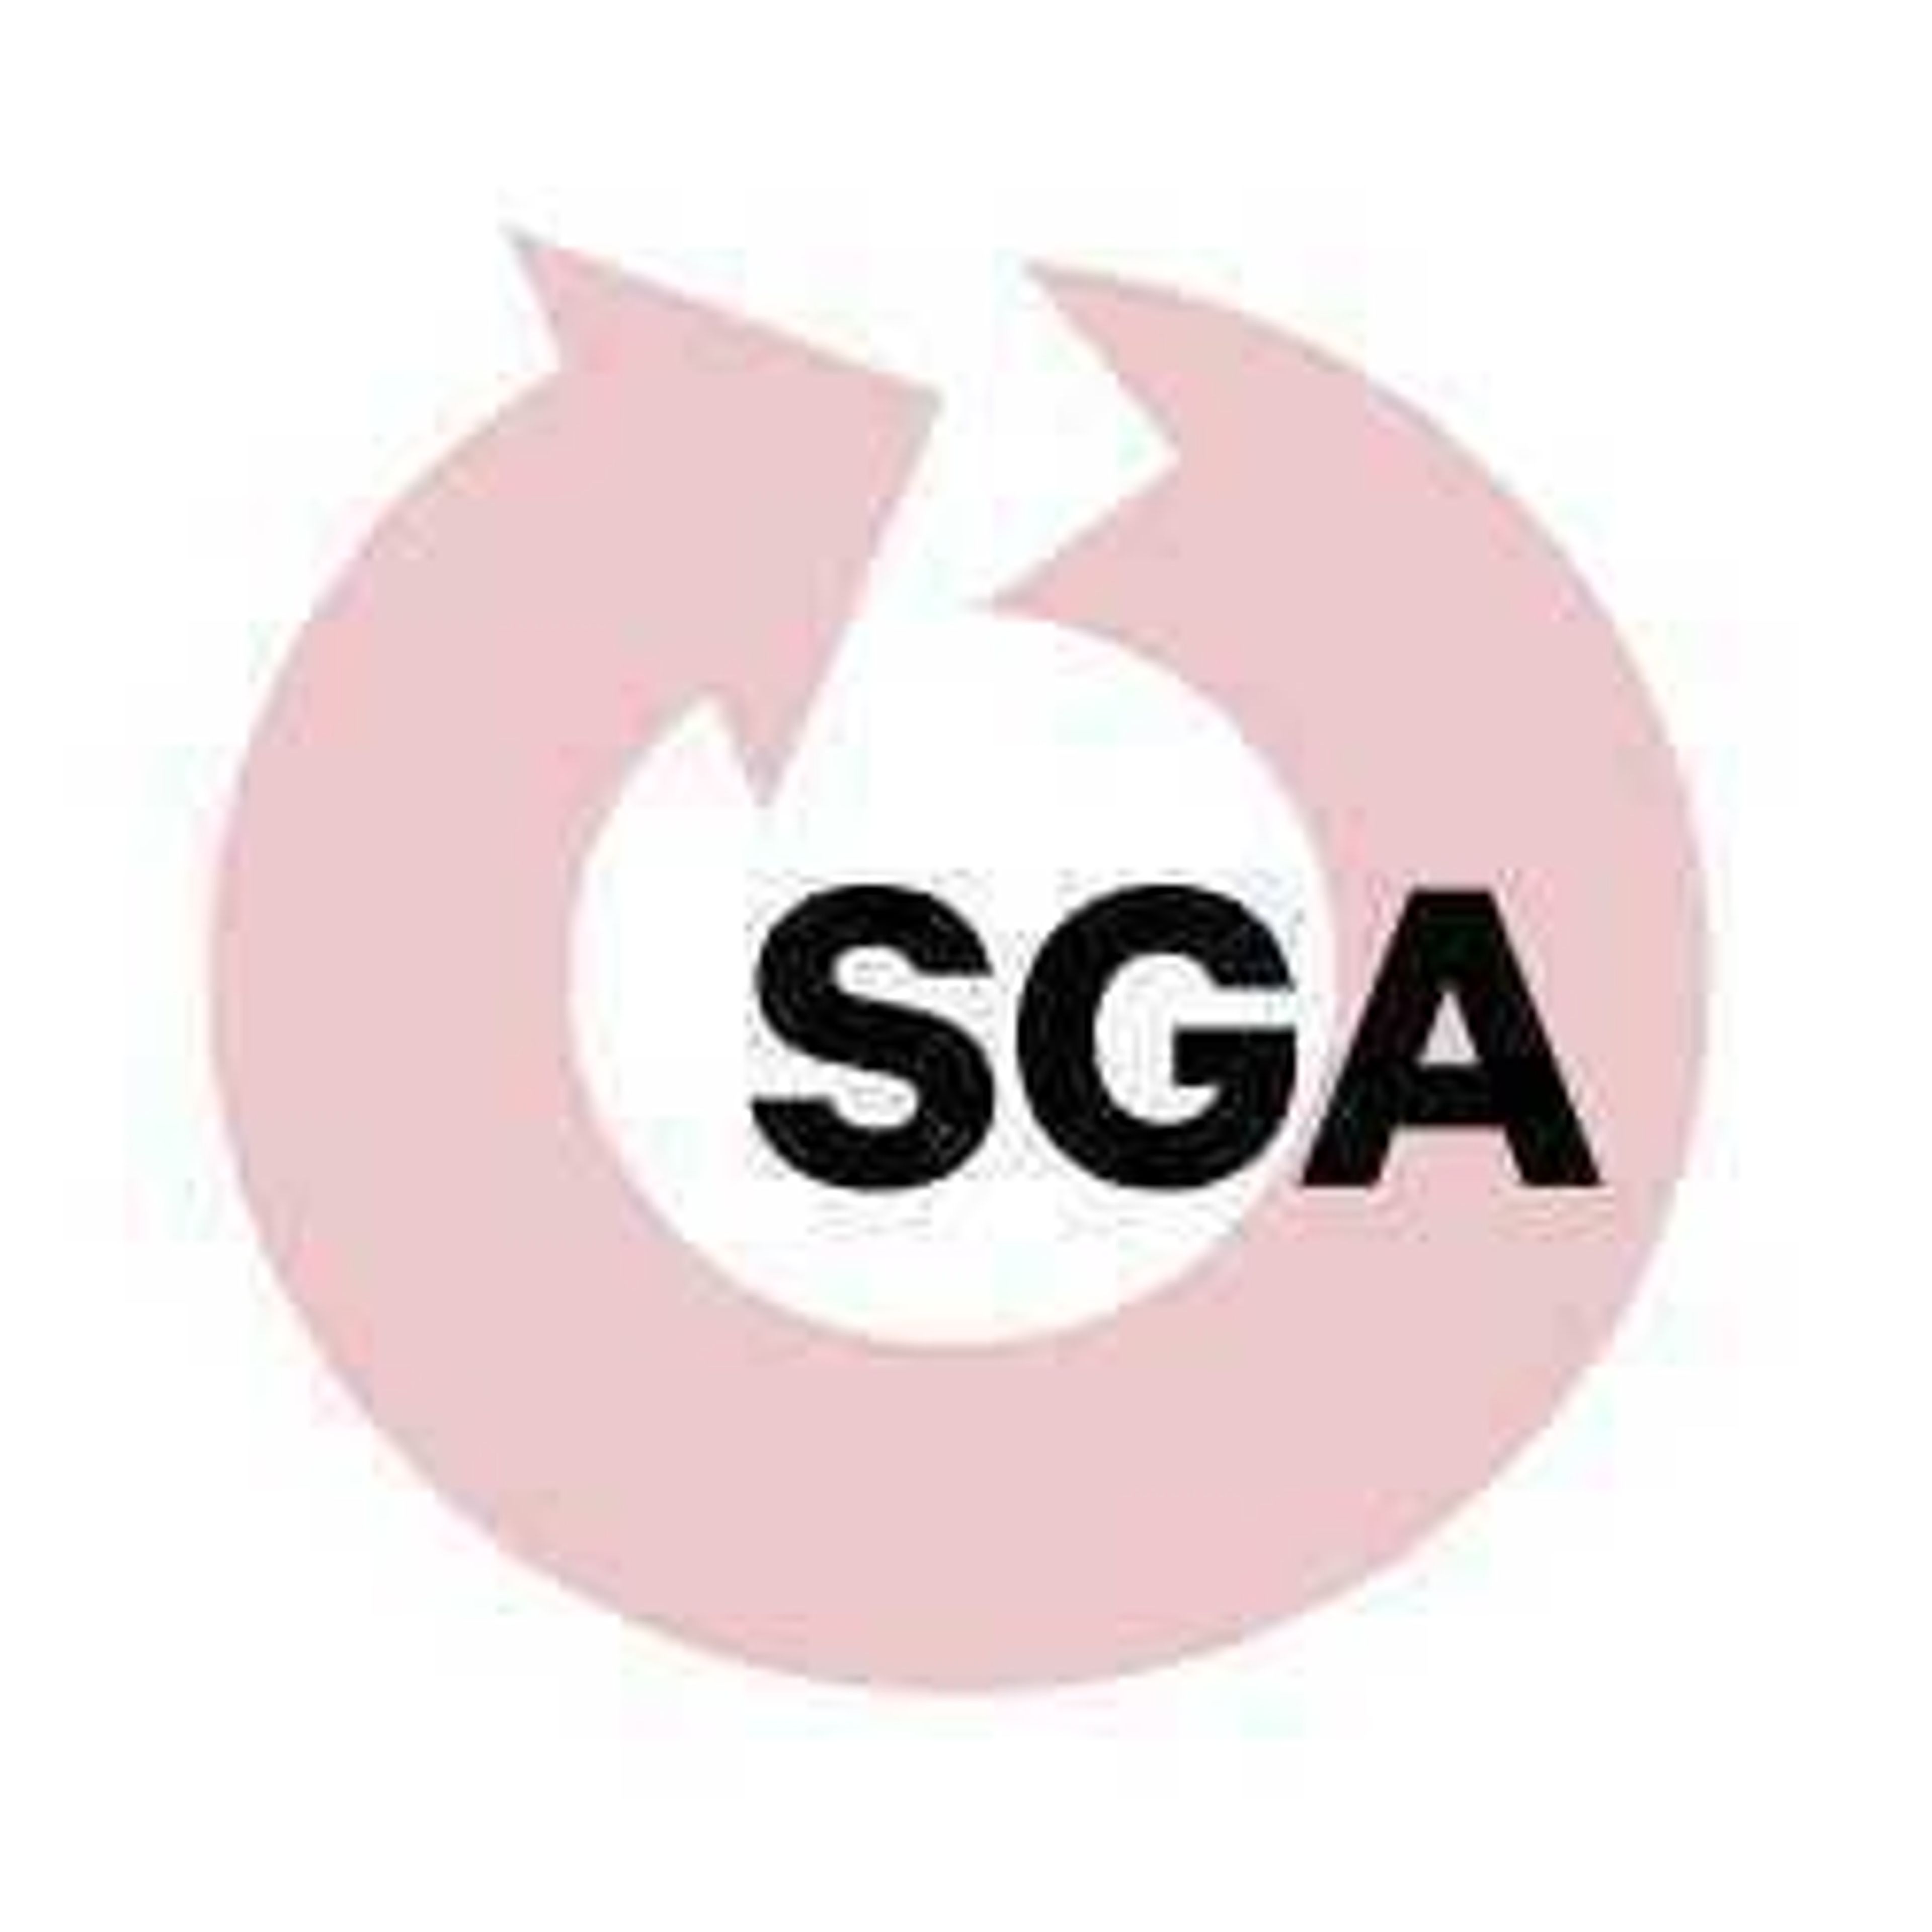 SGA approves new budget for this fiscal year